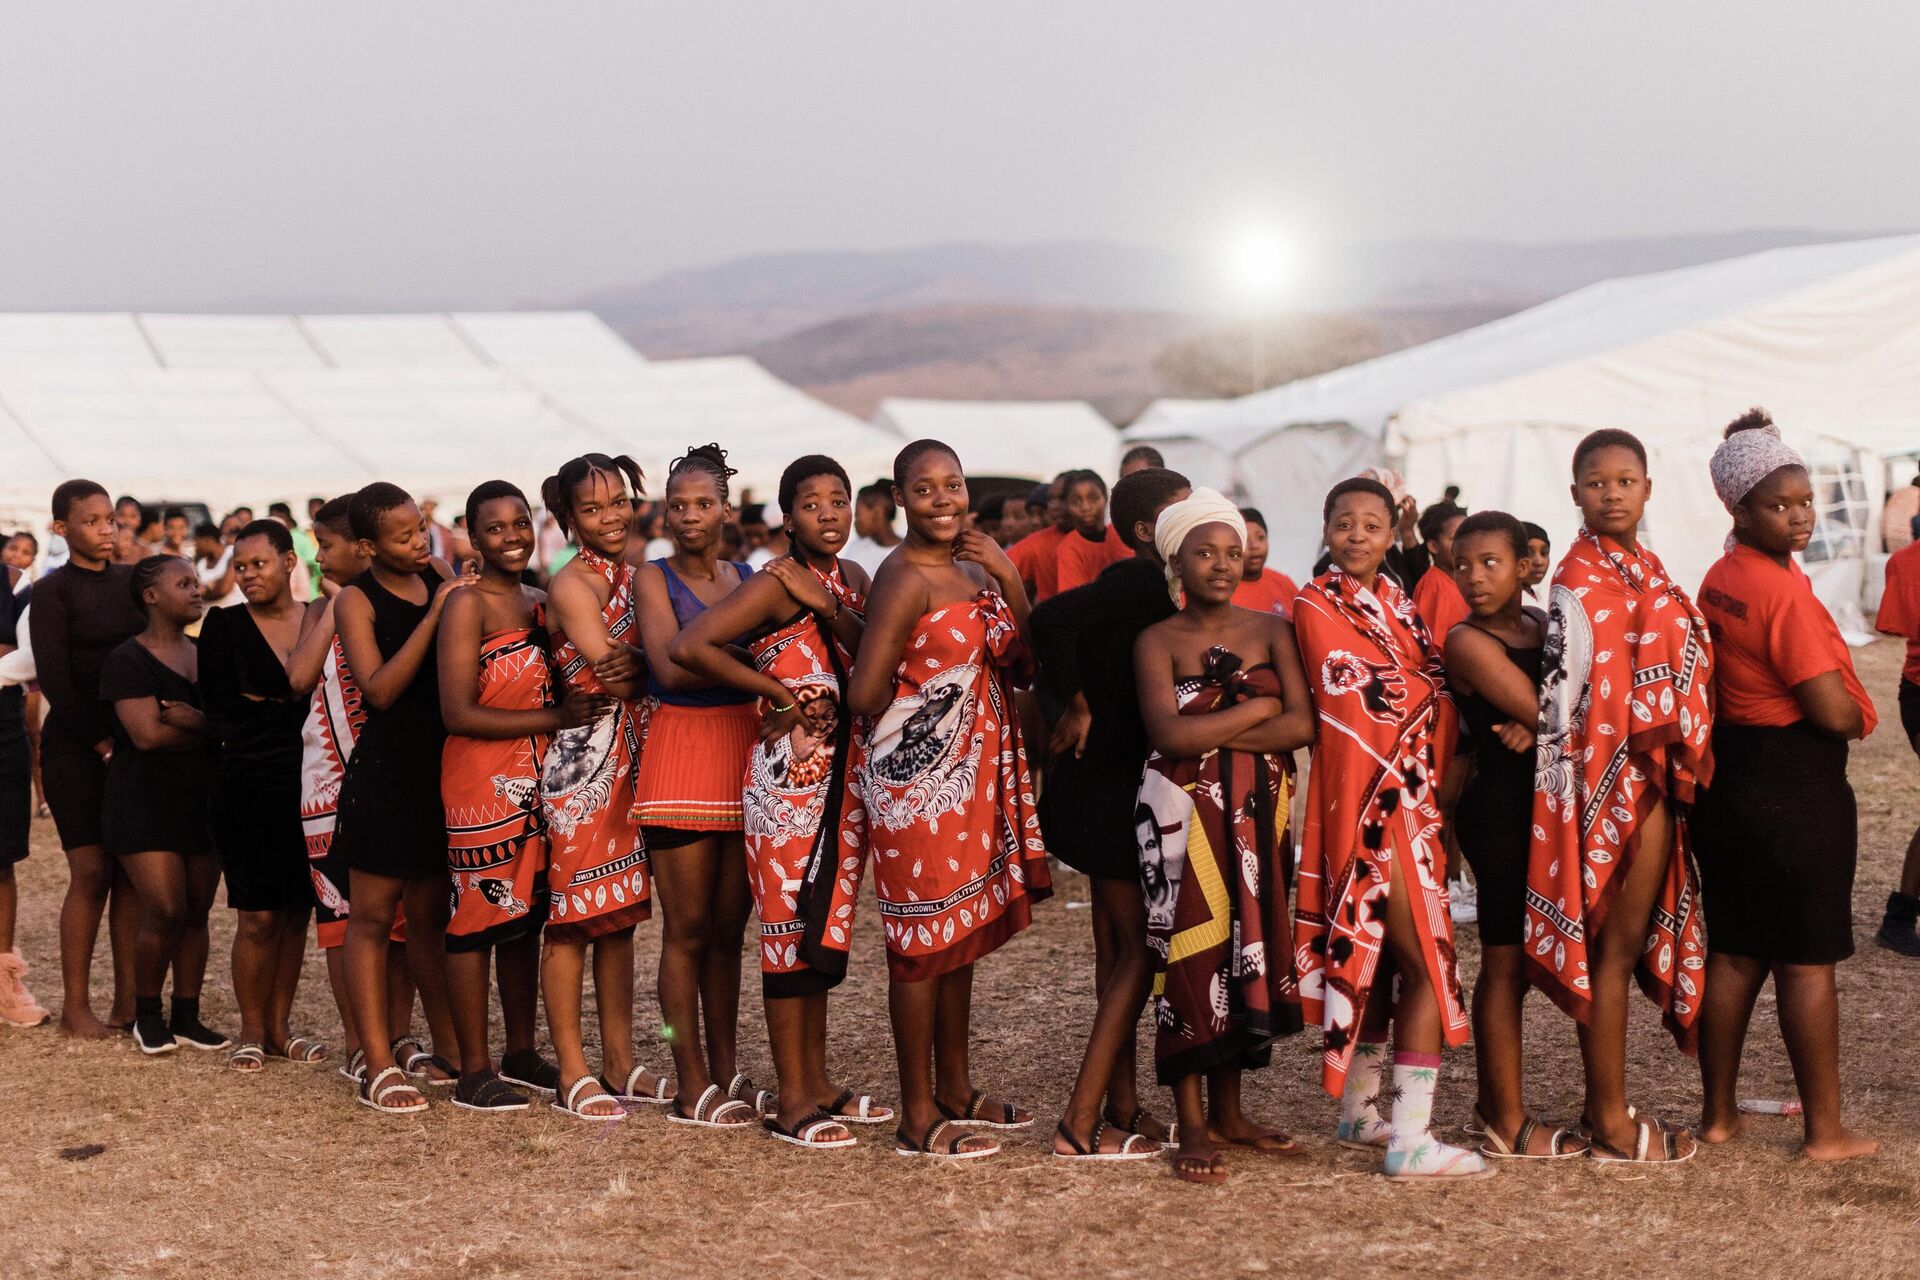 Zulu maidens gather during the annual Umkhosi Womhlanga (reed dance) at the Enyokeni Royal Palace in Nongoma on September 17, 2022. - Every September, tens of thousands of women, known locally as maidens, descend on the royal palace in the southeast KwaZulu-Natal province, to present a tall reed to the new king Misuzulu, as a traditional rite of womanhood. (Photo by RAJESH JANTILAL / AFP) - Sputnik International, 1920, 18.09.2022